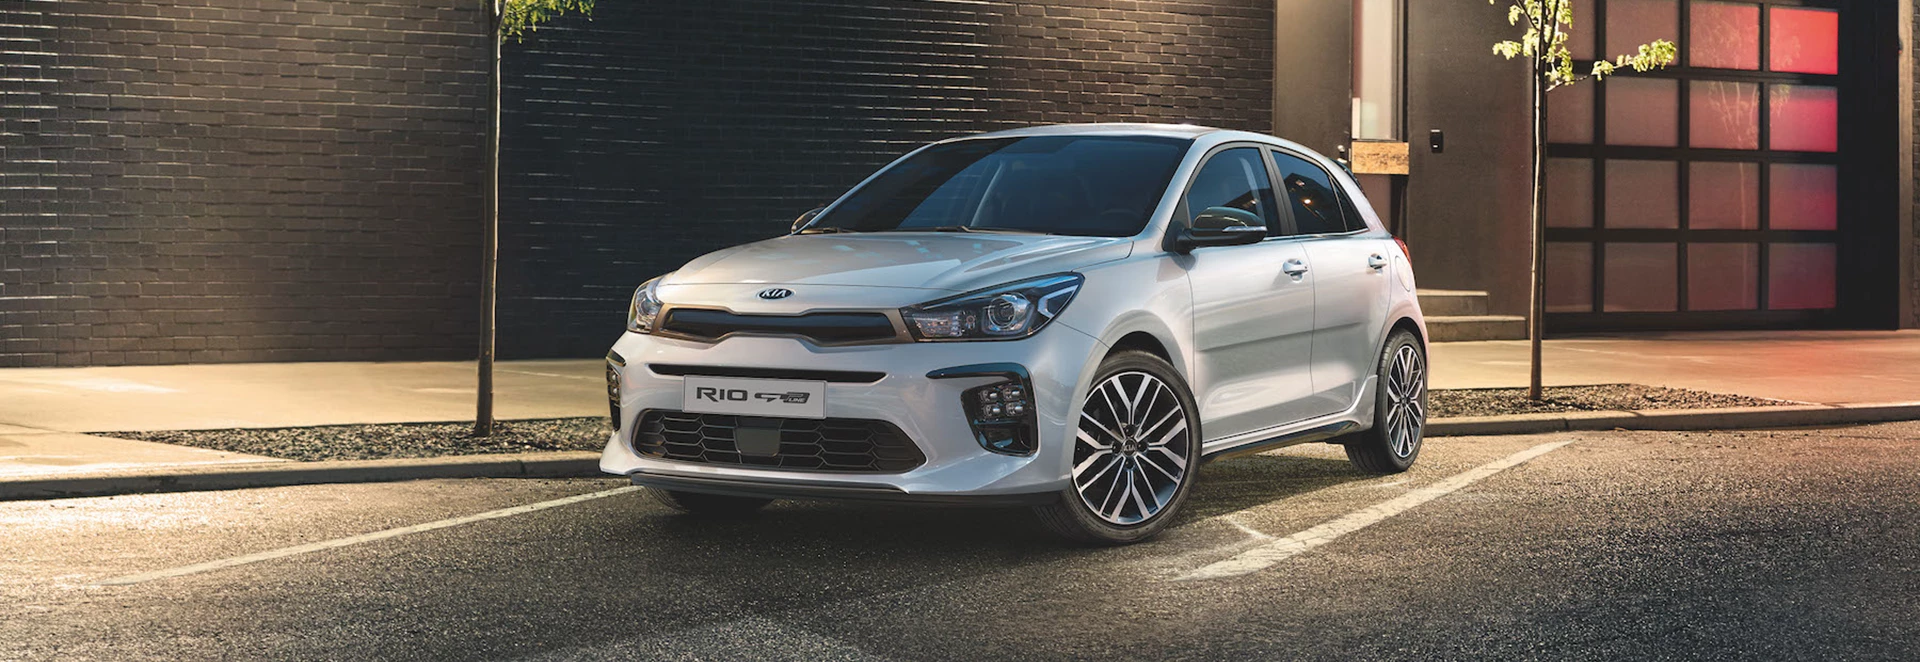 Kia unveils heavily updated Rio supermini with new electrified tech 